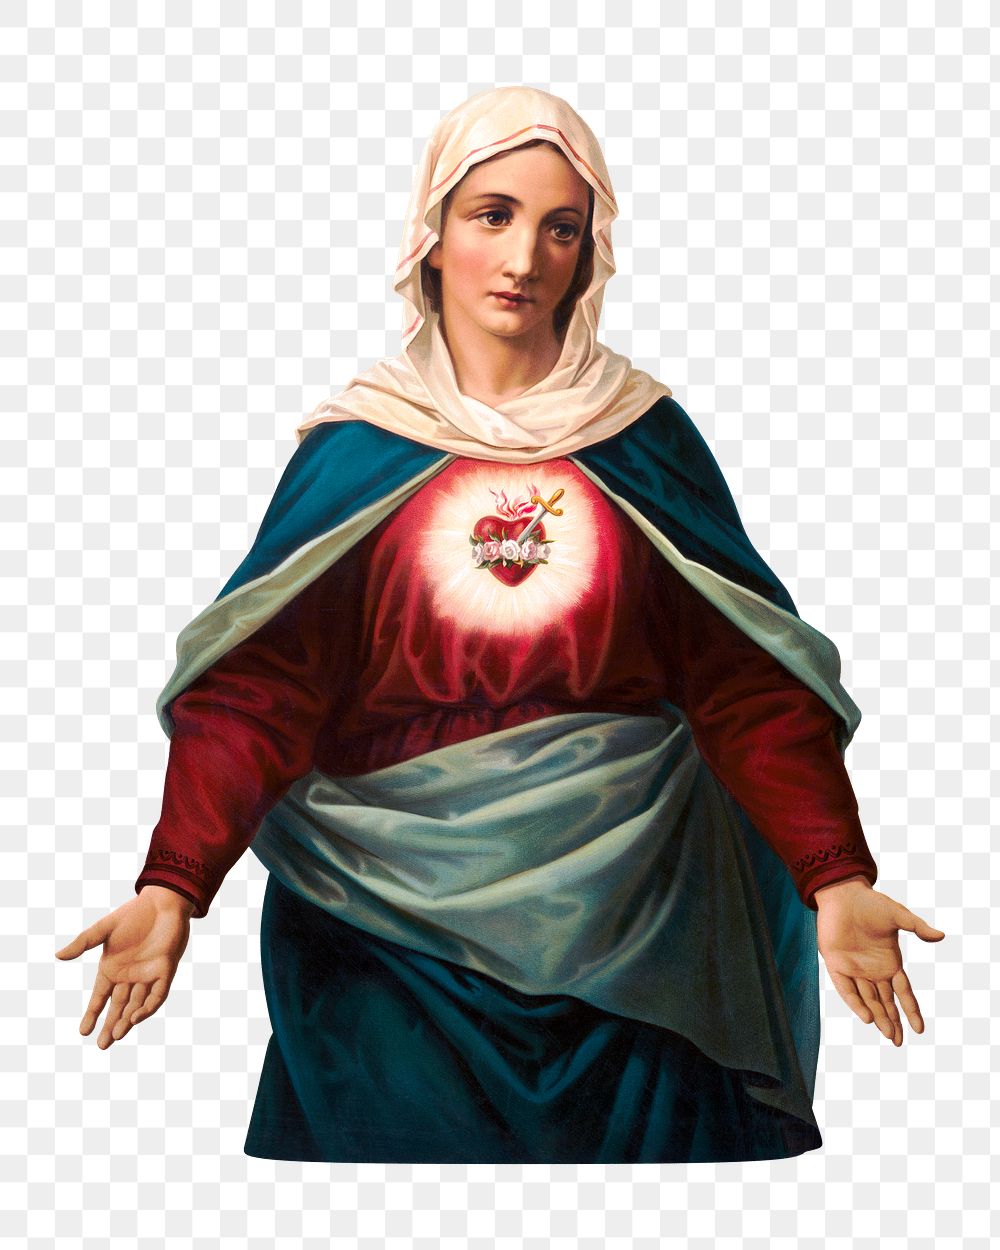 PNG Virgin Mary with heart emblem on chest, vintage religious illustration, transparent background. Remixed by rawpixel.